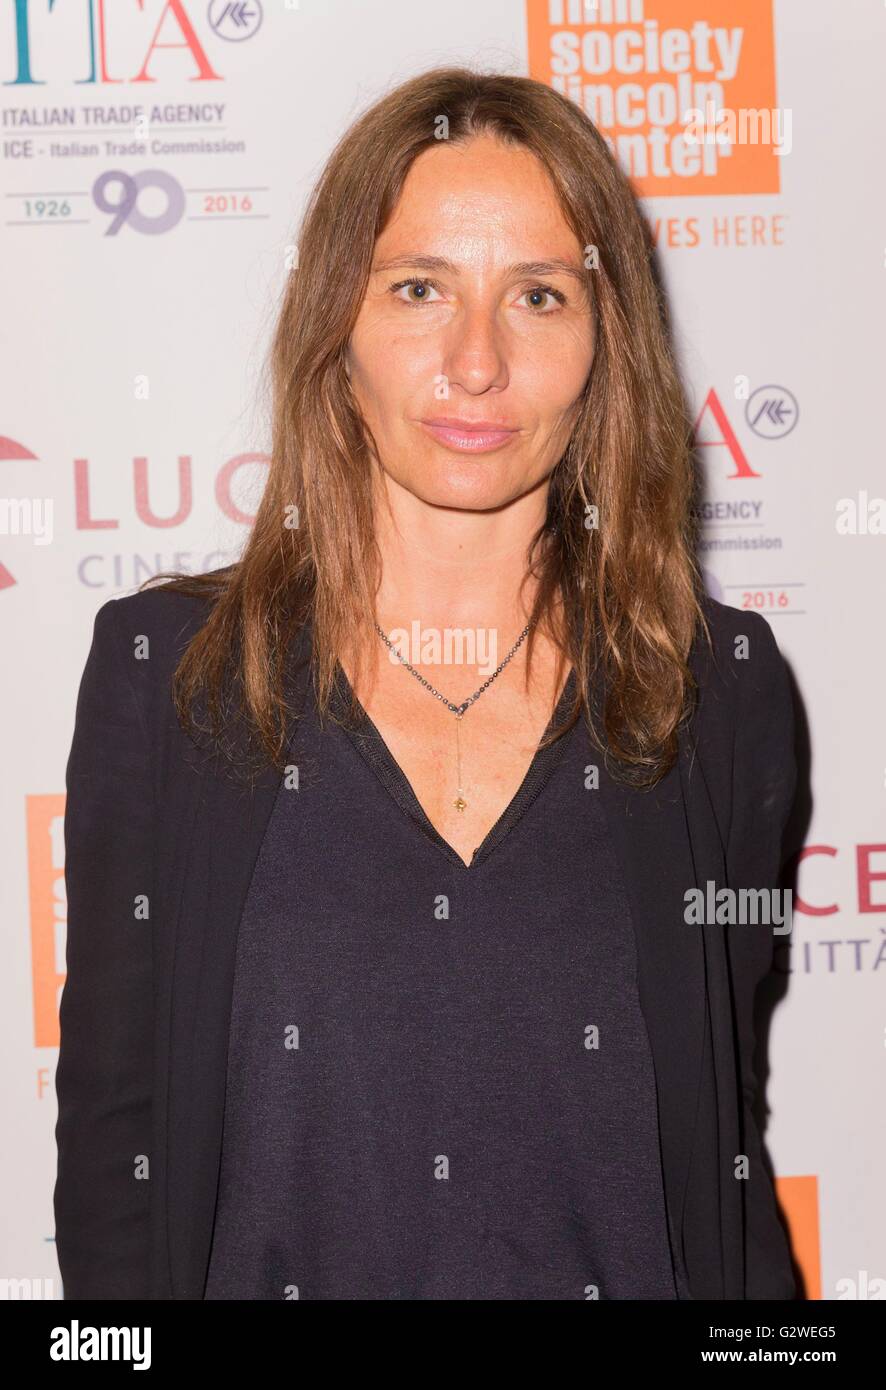 New York, NY, USA. 3rd June, 2016. Maria Sole Tognazzi at arrivals for Open Roads: New Italian Cinema, presented by Istituto Luce Cinecitta and Film Society of Lincoln Center, Walter Reade Theatre at Lincoln Center, New York, NY June 3, 2016. Credit:  Lev Radin/Everett Collection/Alamy Live News Stock Photo